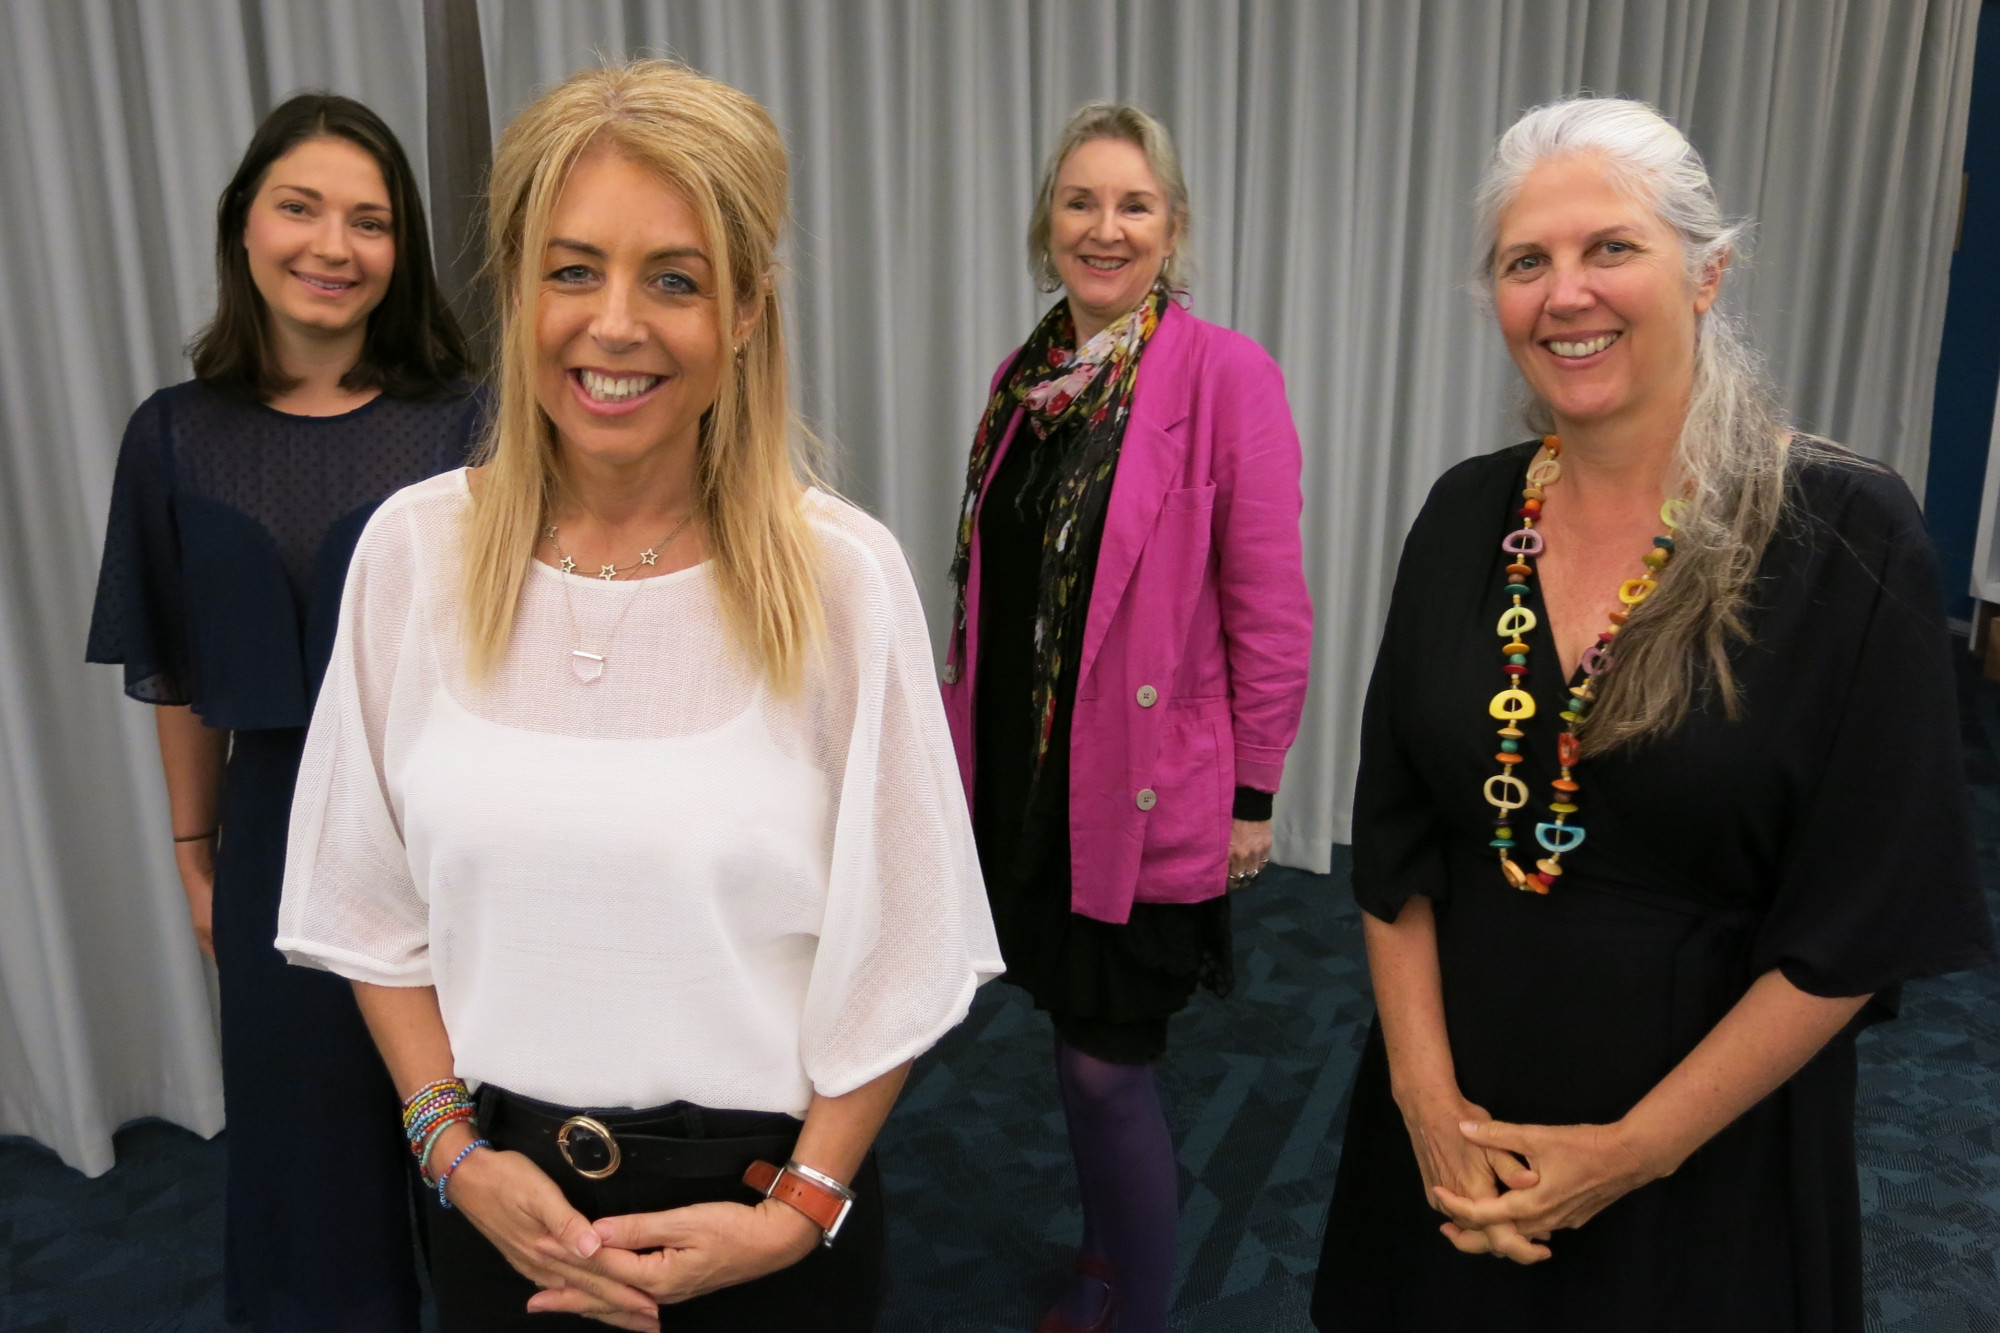 ABC Radio Far North journalist Marian Faa, public relations specialist Pip Miller, radio producer and presenter Sarah Speller, and ABC Radio Far North chief of staff, Fiona Sewell are among the founding branch committee members for Women in Media FNQ.